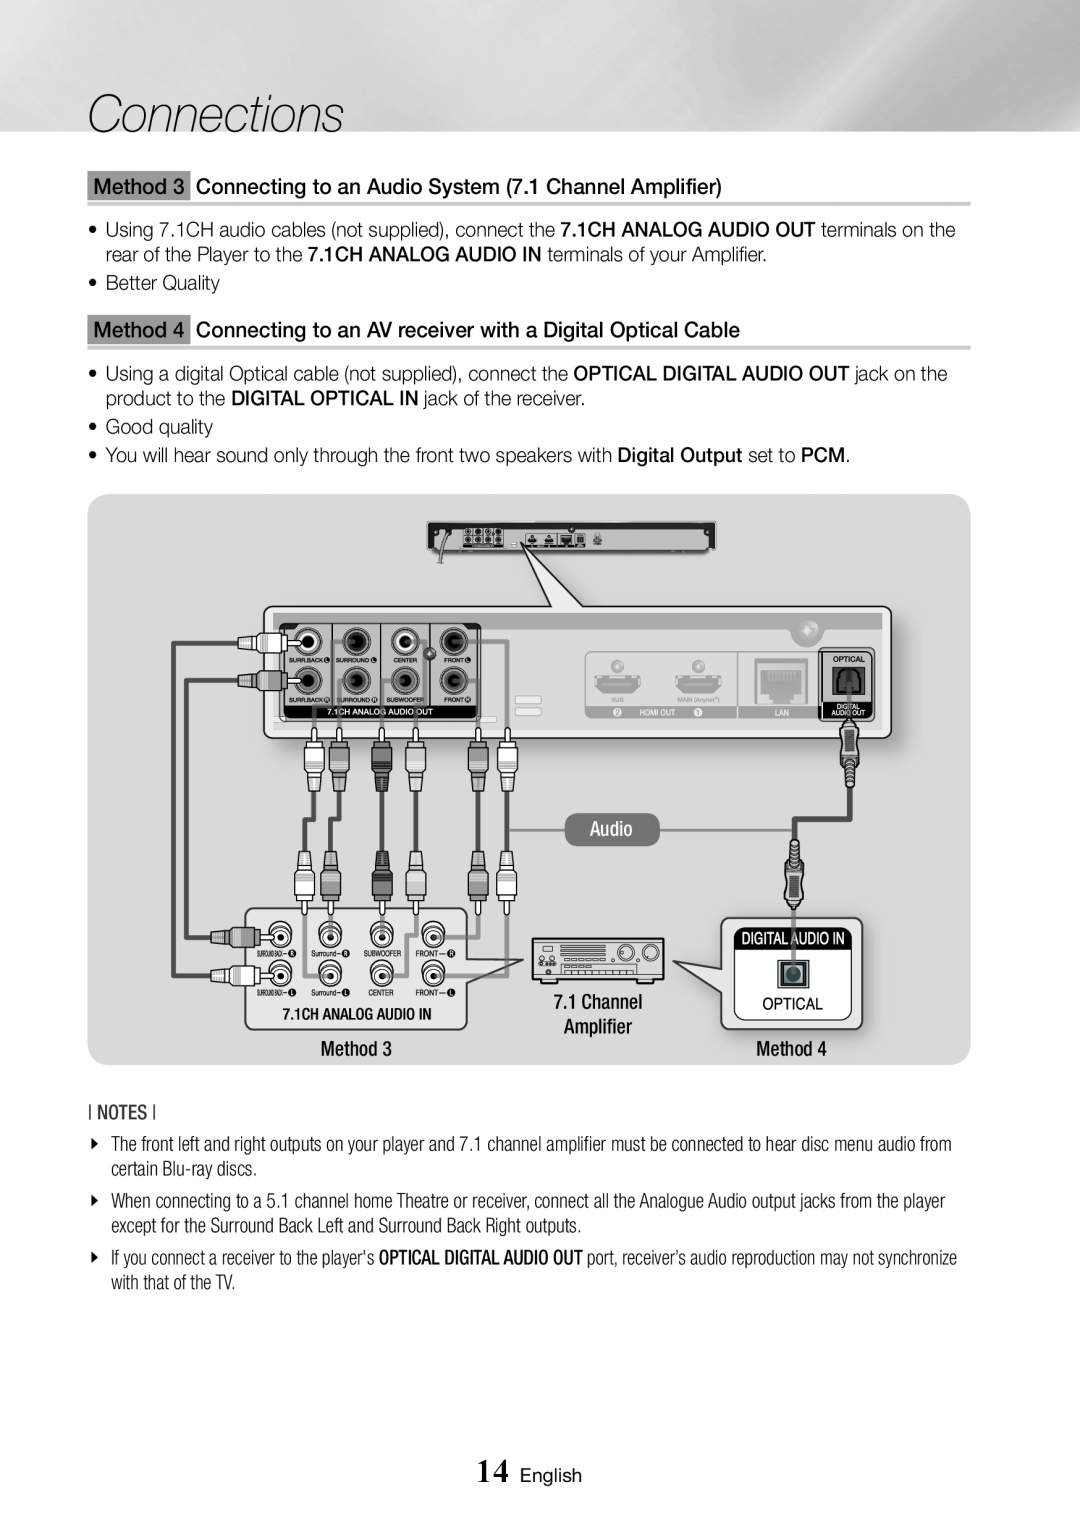 Samsung BD-J7500/EN, BD-J7500/ZF manual Connections, Method 3 Connecting to an Audio System 7.1 Channel Amplifier 